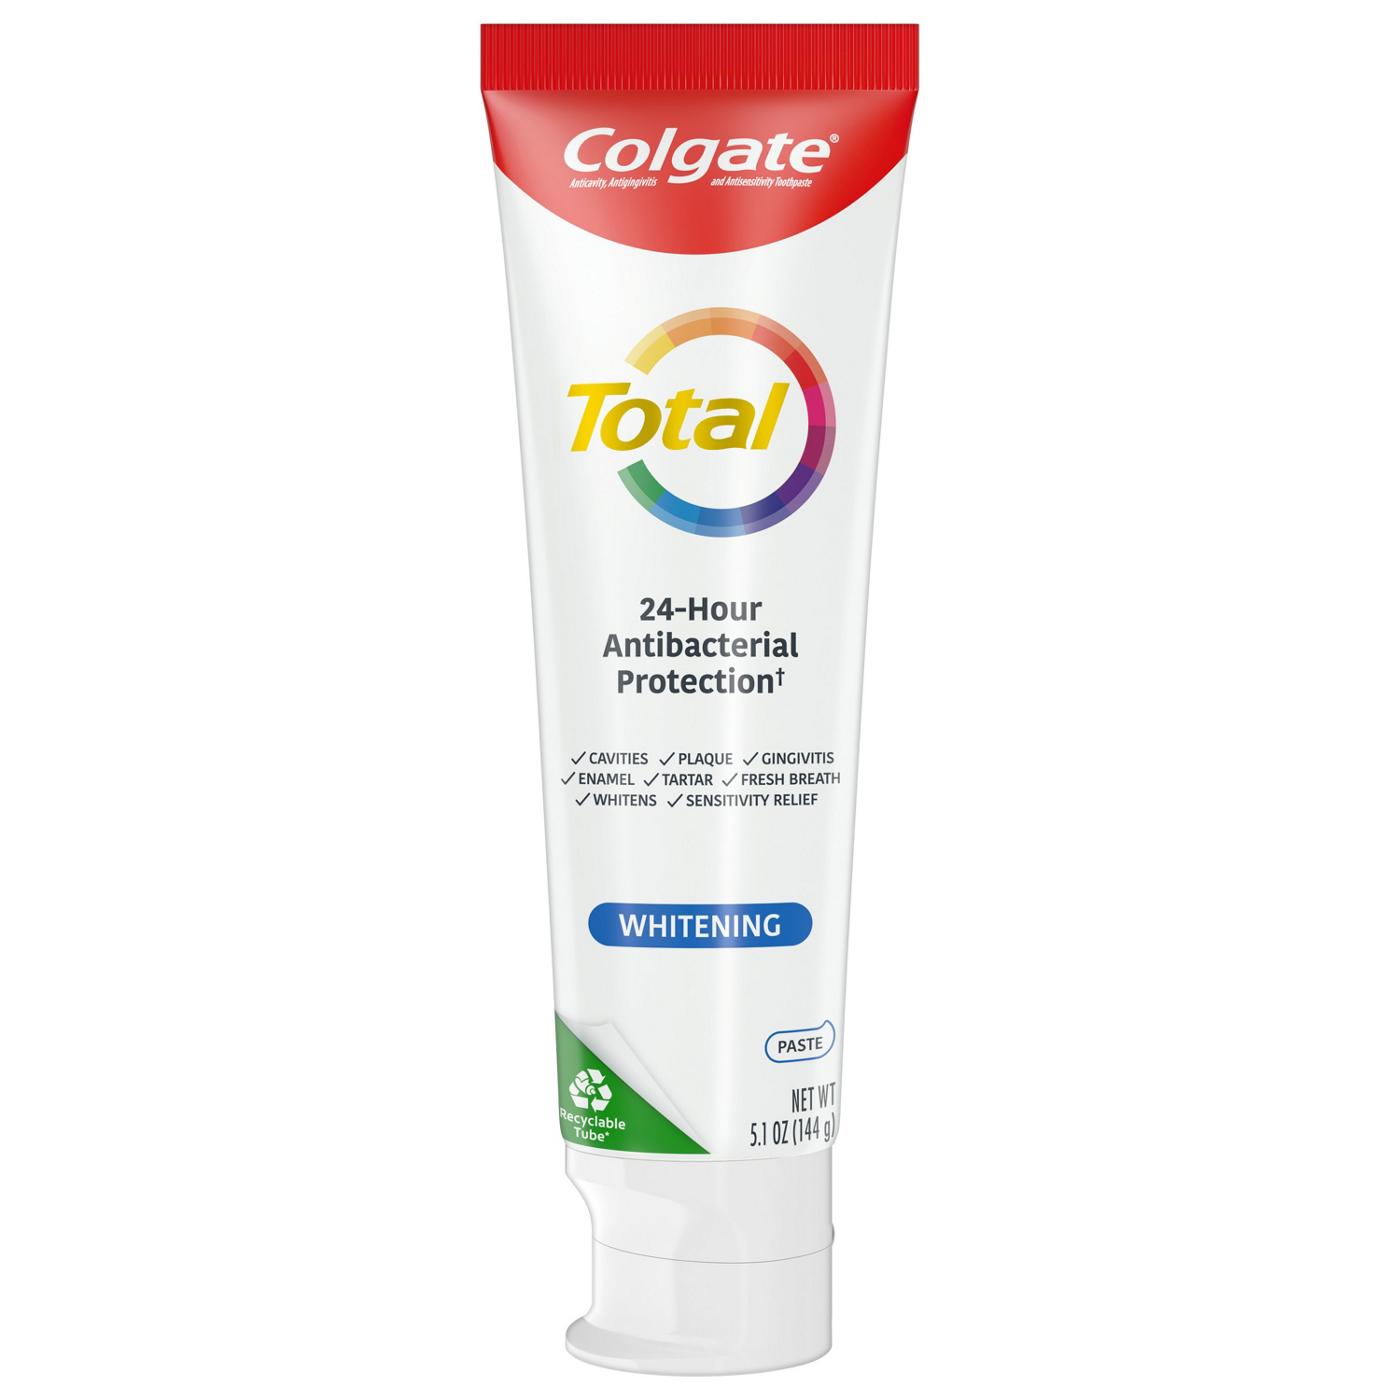 Colgate Total Whitening Toothpaste, 2 Pk; image 5 of 18